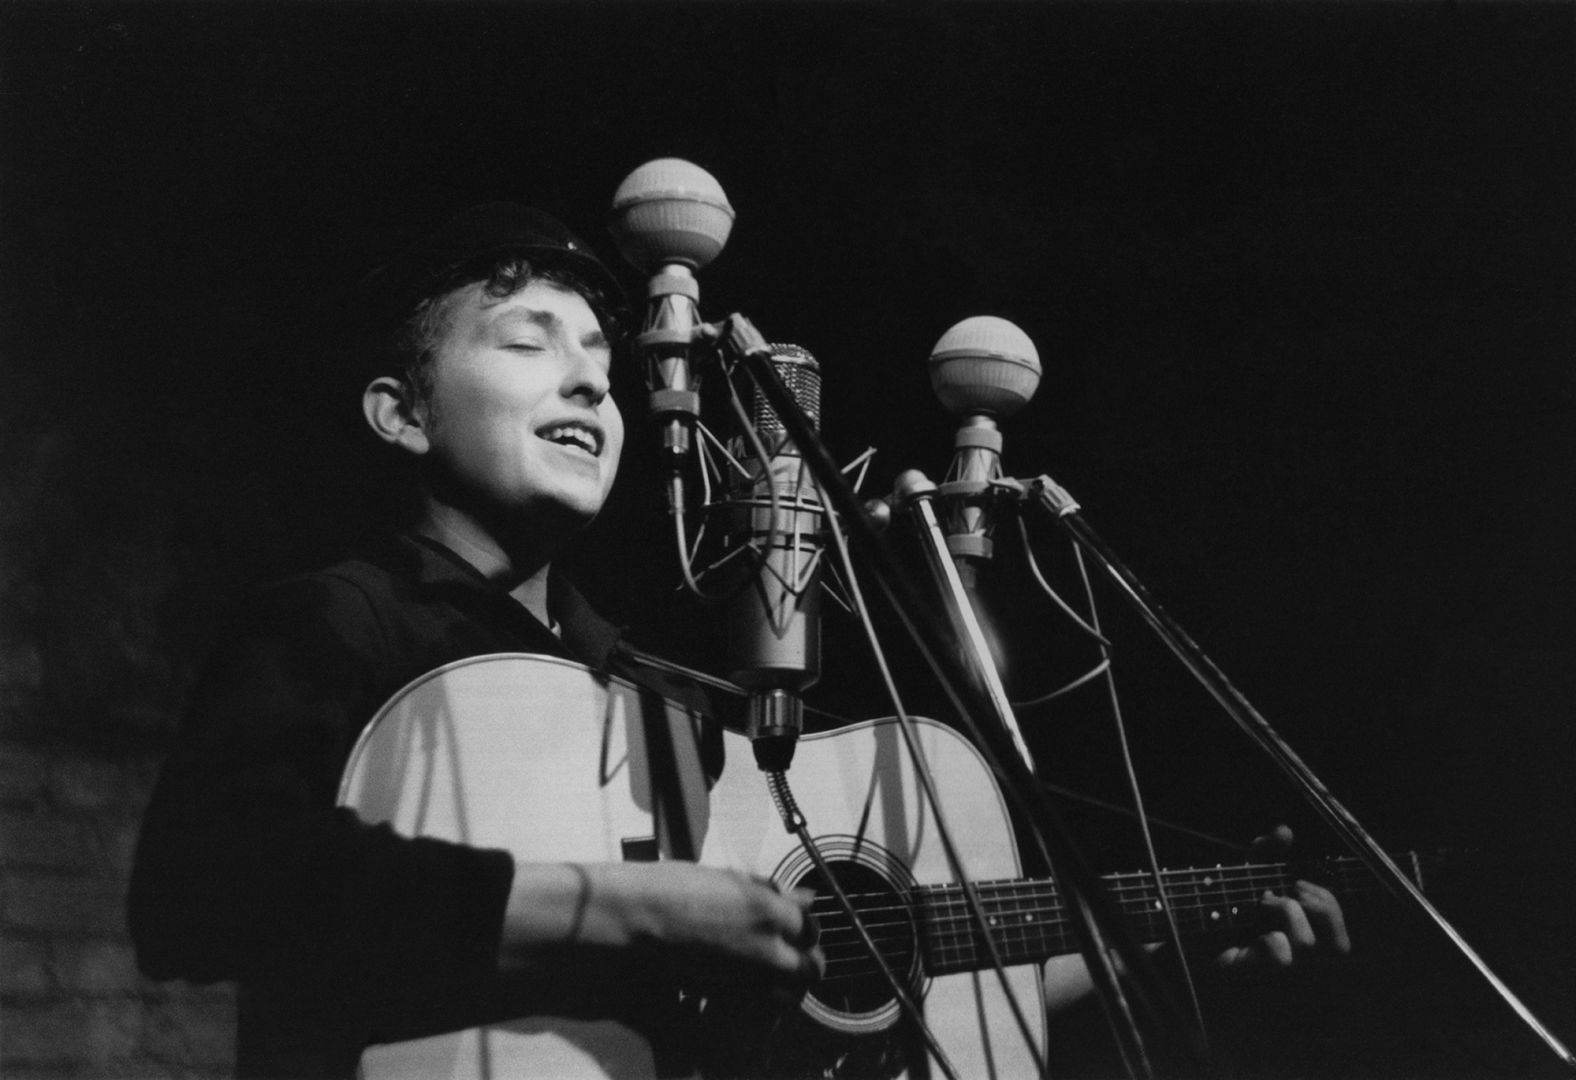 Dylan performs at The Bitter End folk club in New York City in 1961. His first album, "Bob Dylan," came out in 1962 and consisted mostly of old folk songs.